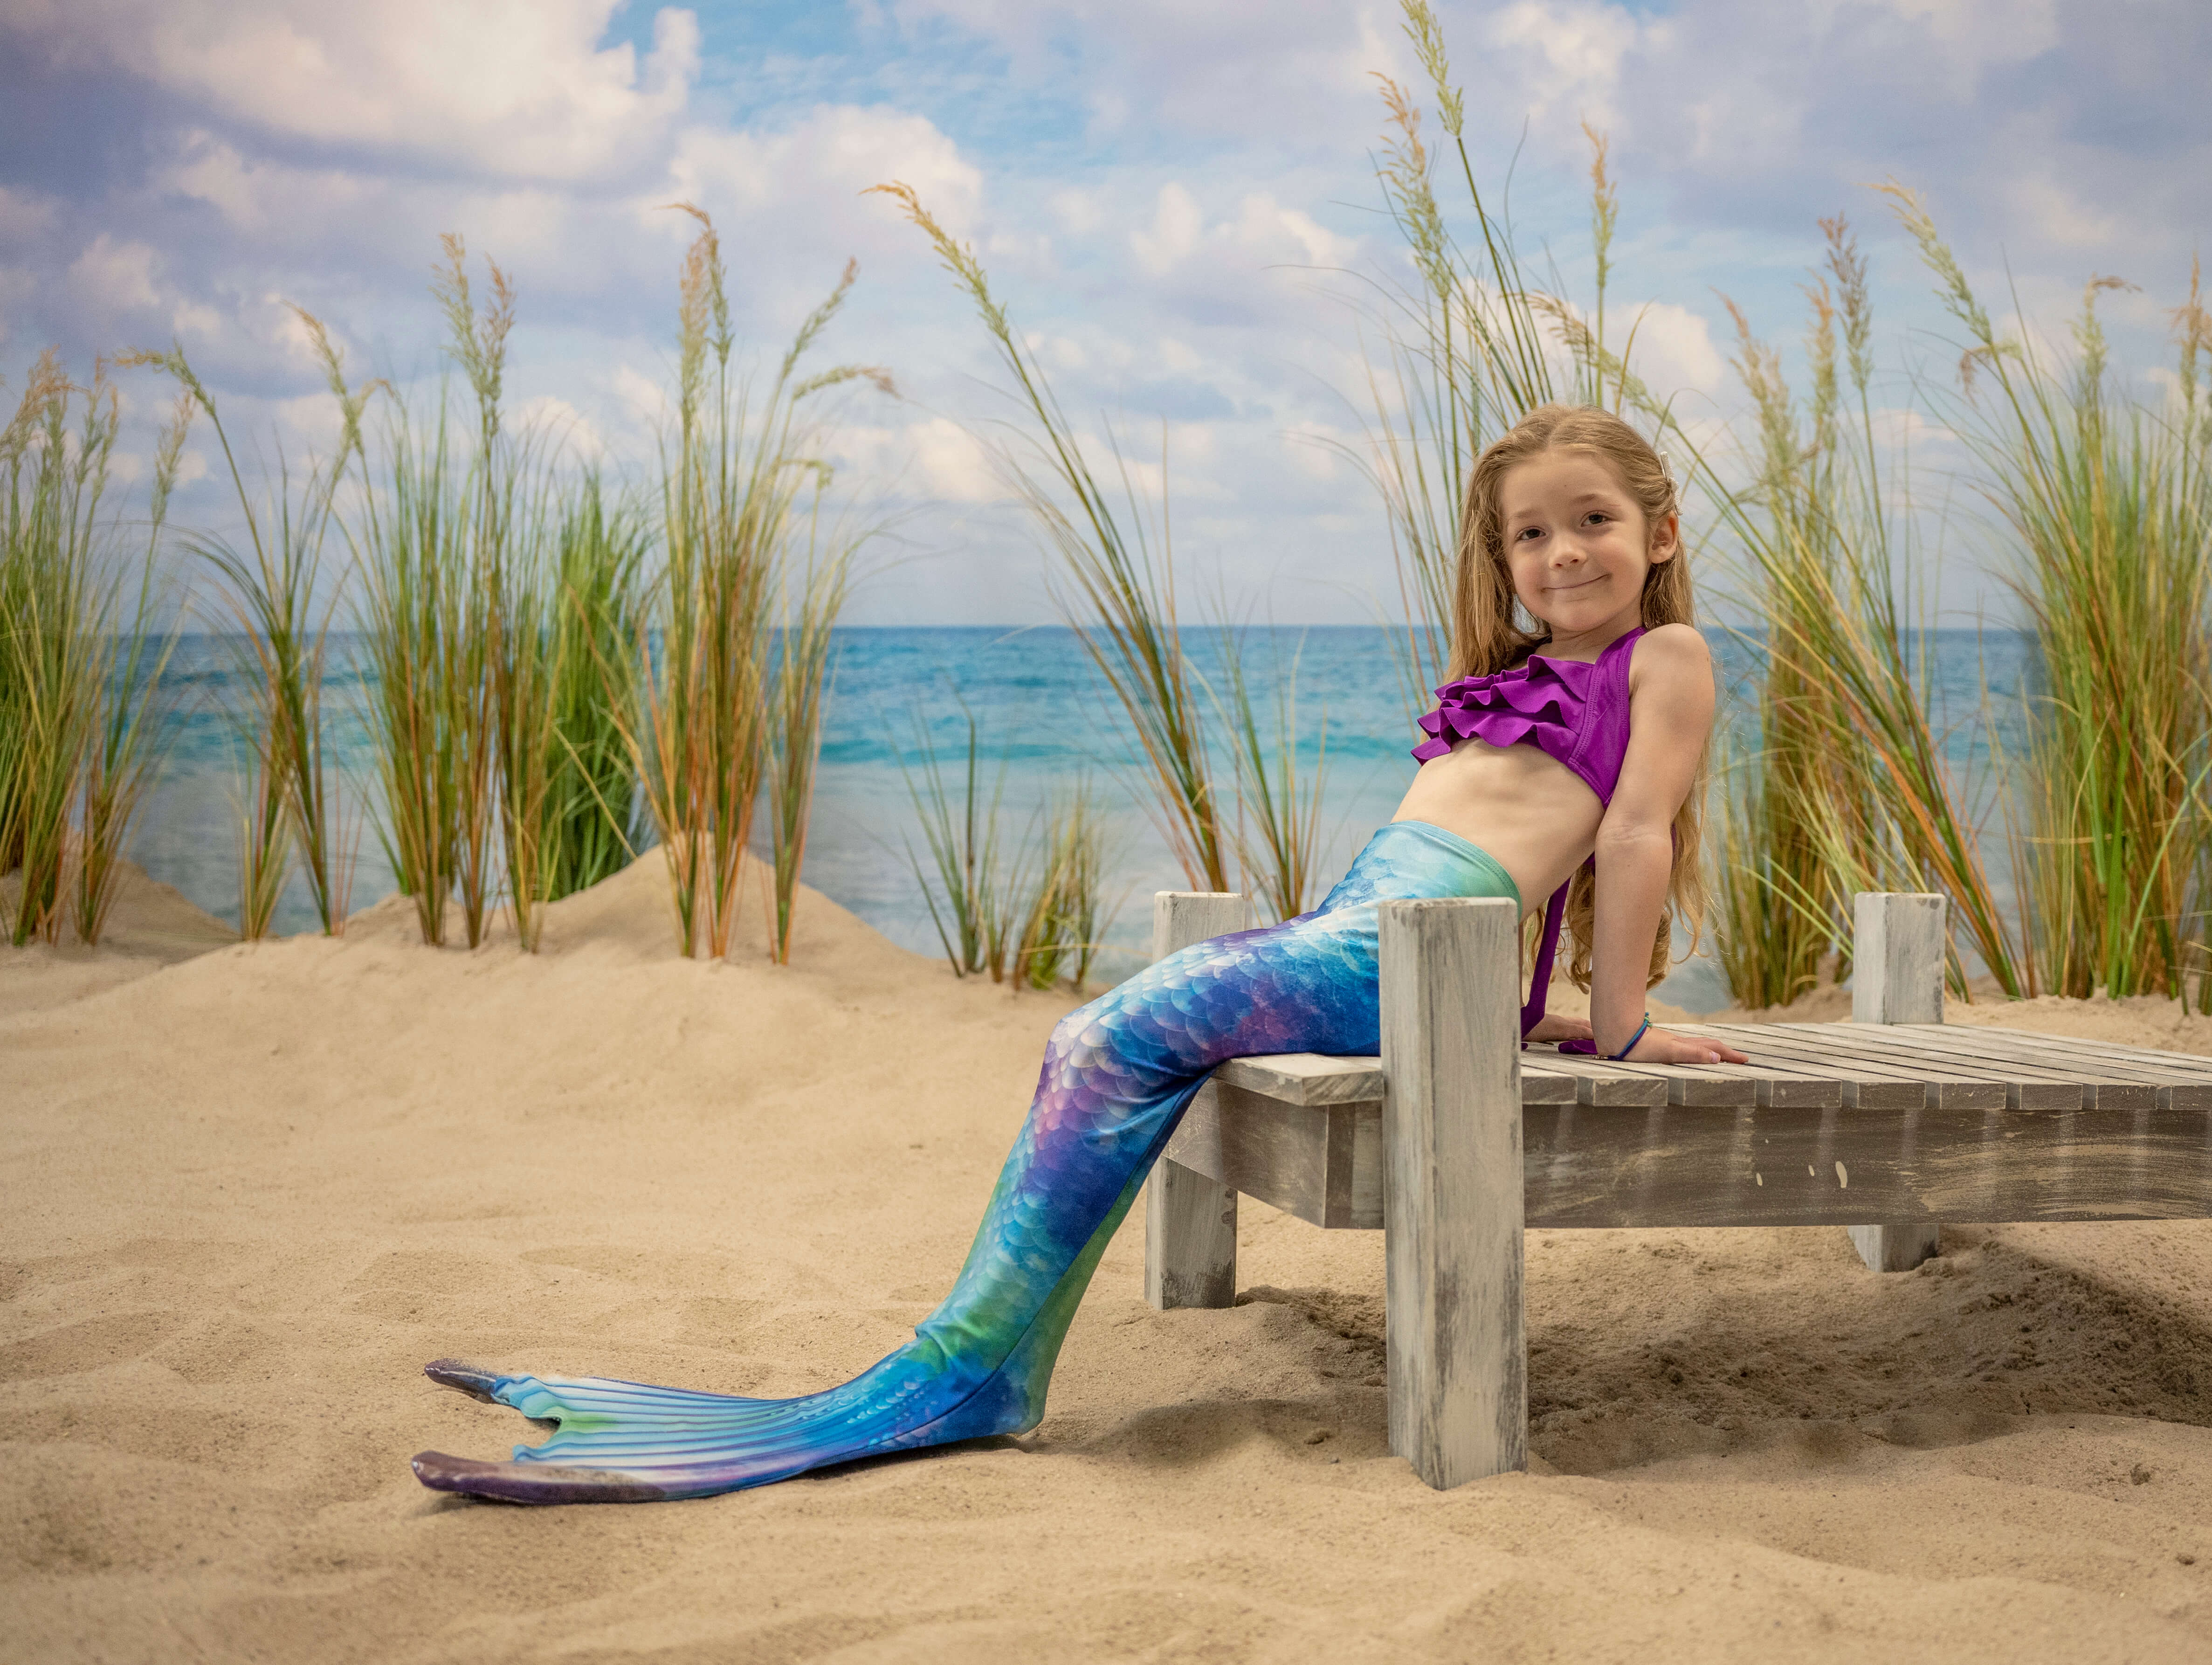 Things to do with kids, the mermaid experience